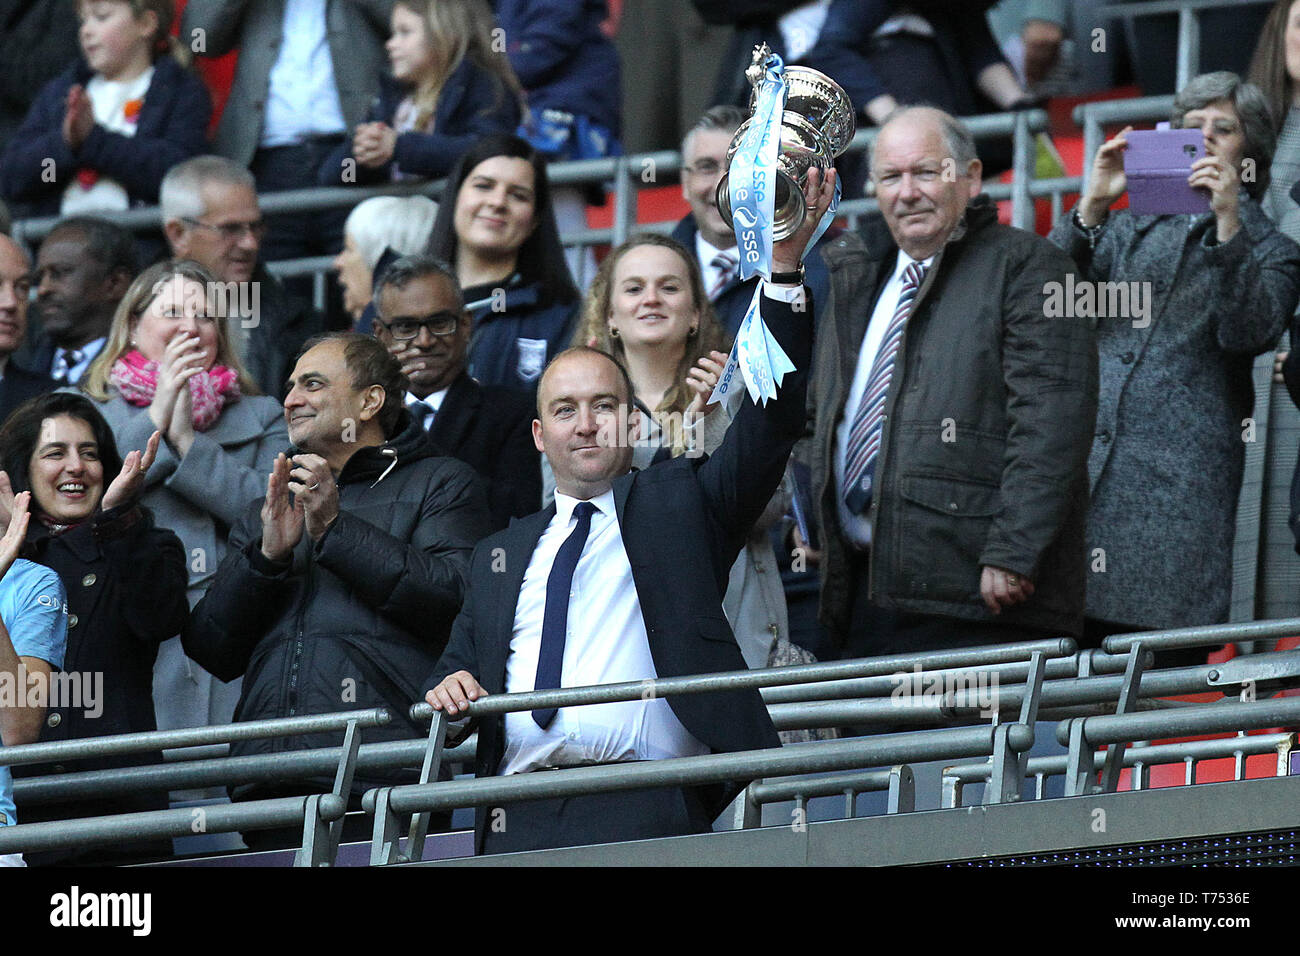 London, UK. 04th May, 2019. London, UK. 04th May, 2019. London, UK. 04th May, 2019. London, UK. 02nd May, 2019. Manchester City Manager Nick Cushing holding the FA Women's Cup Final match between Manchester City Women and West Ham United Ladies at Wembley Stadium on May 4th 2019 in London, England.Credit: PHC Images/Alamy Live News Credit: PHC Images/Alamy Live News Credit: PHC Images/Alamy Live News Credit: PHC Images/Alamy Live News Credit: PHC Images/Alamy Live News Stock Photo